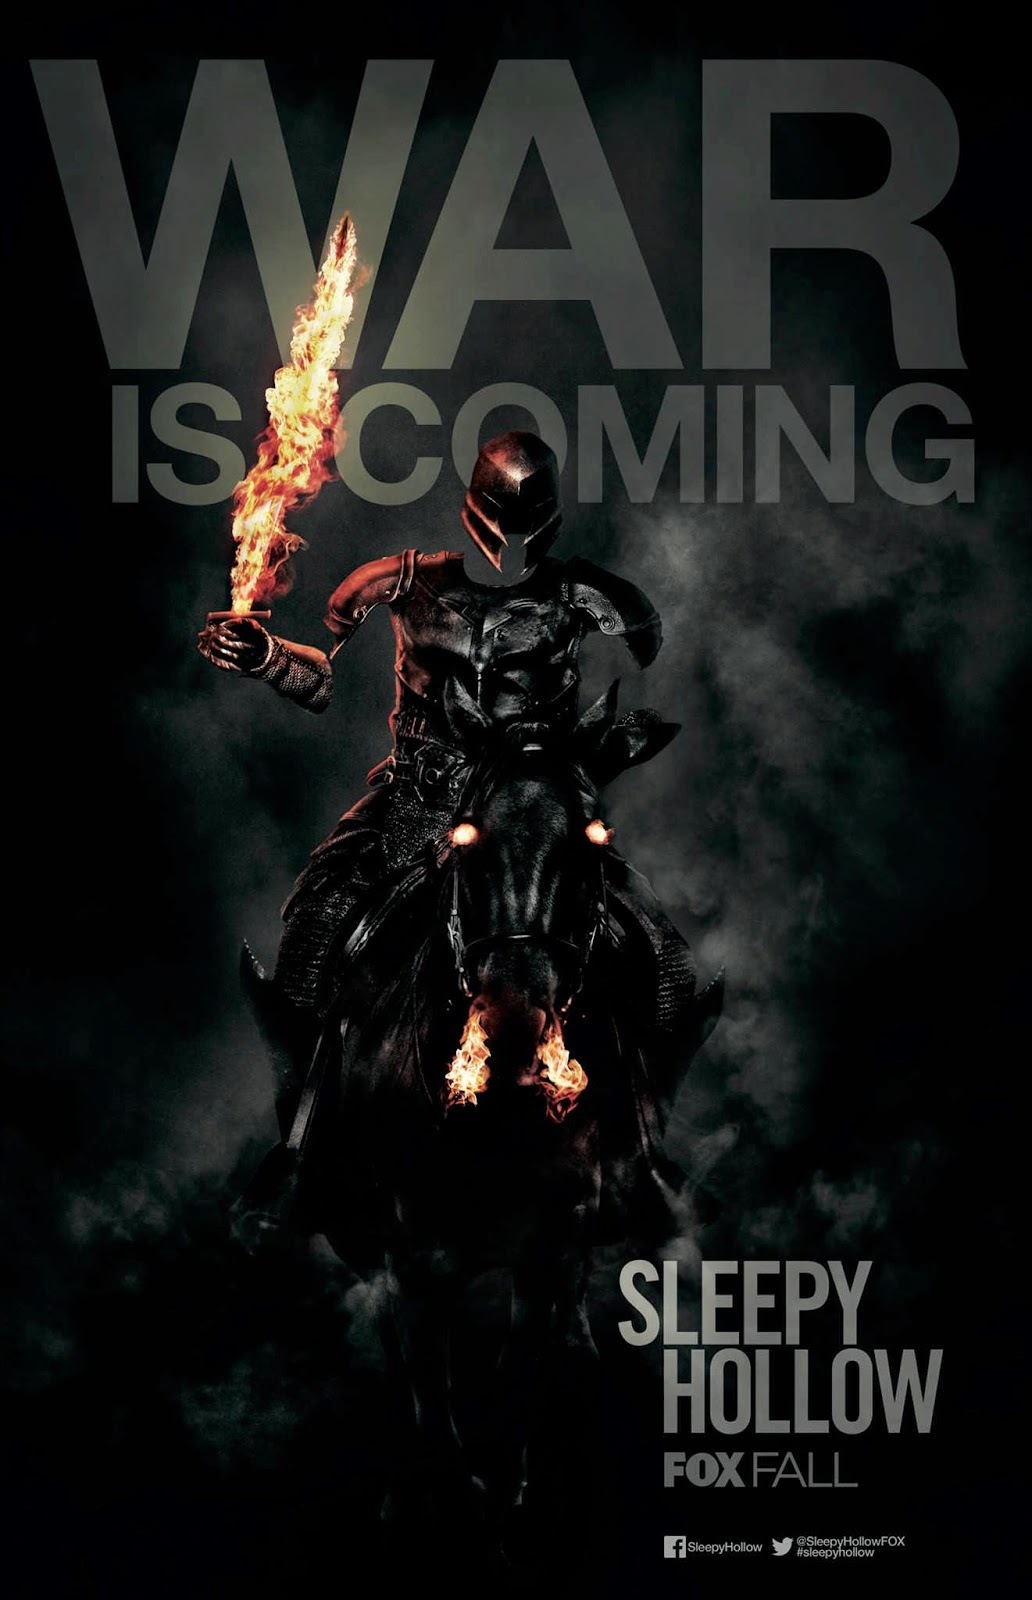 Marketing poster featuring Ed riding as the character 